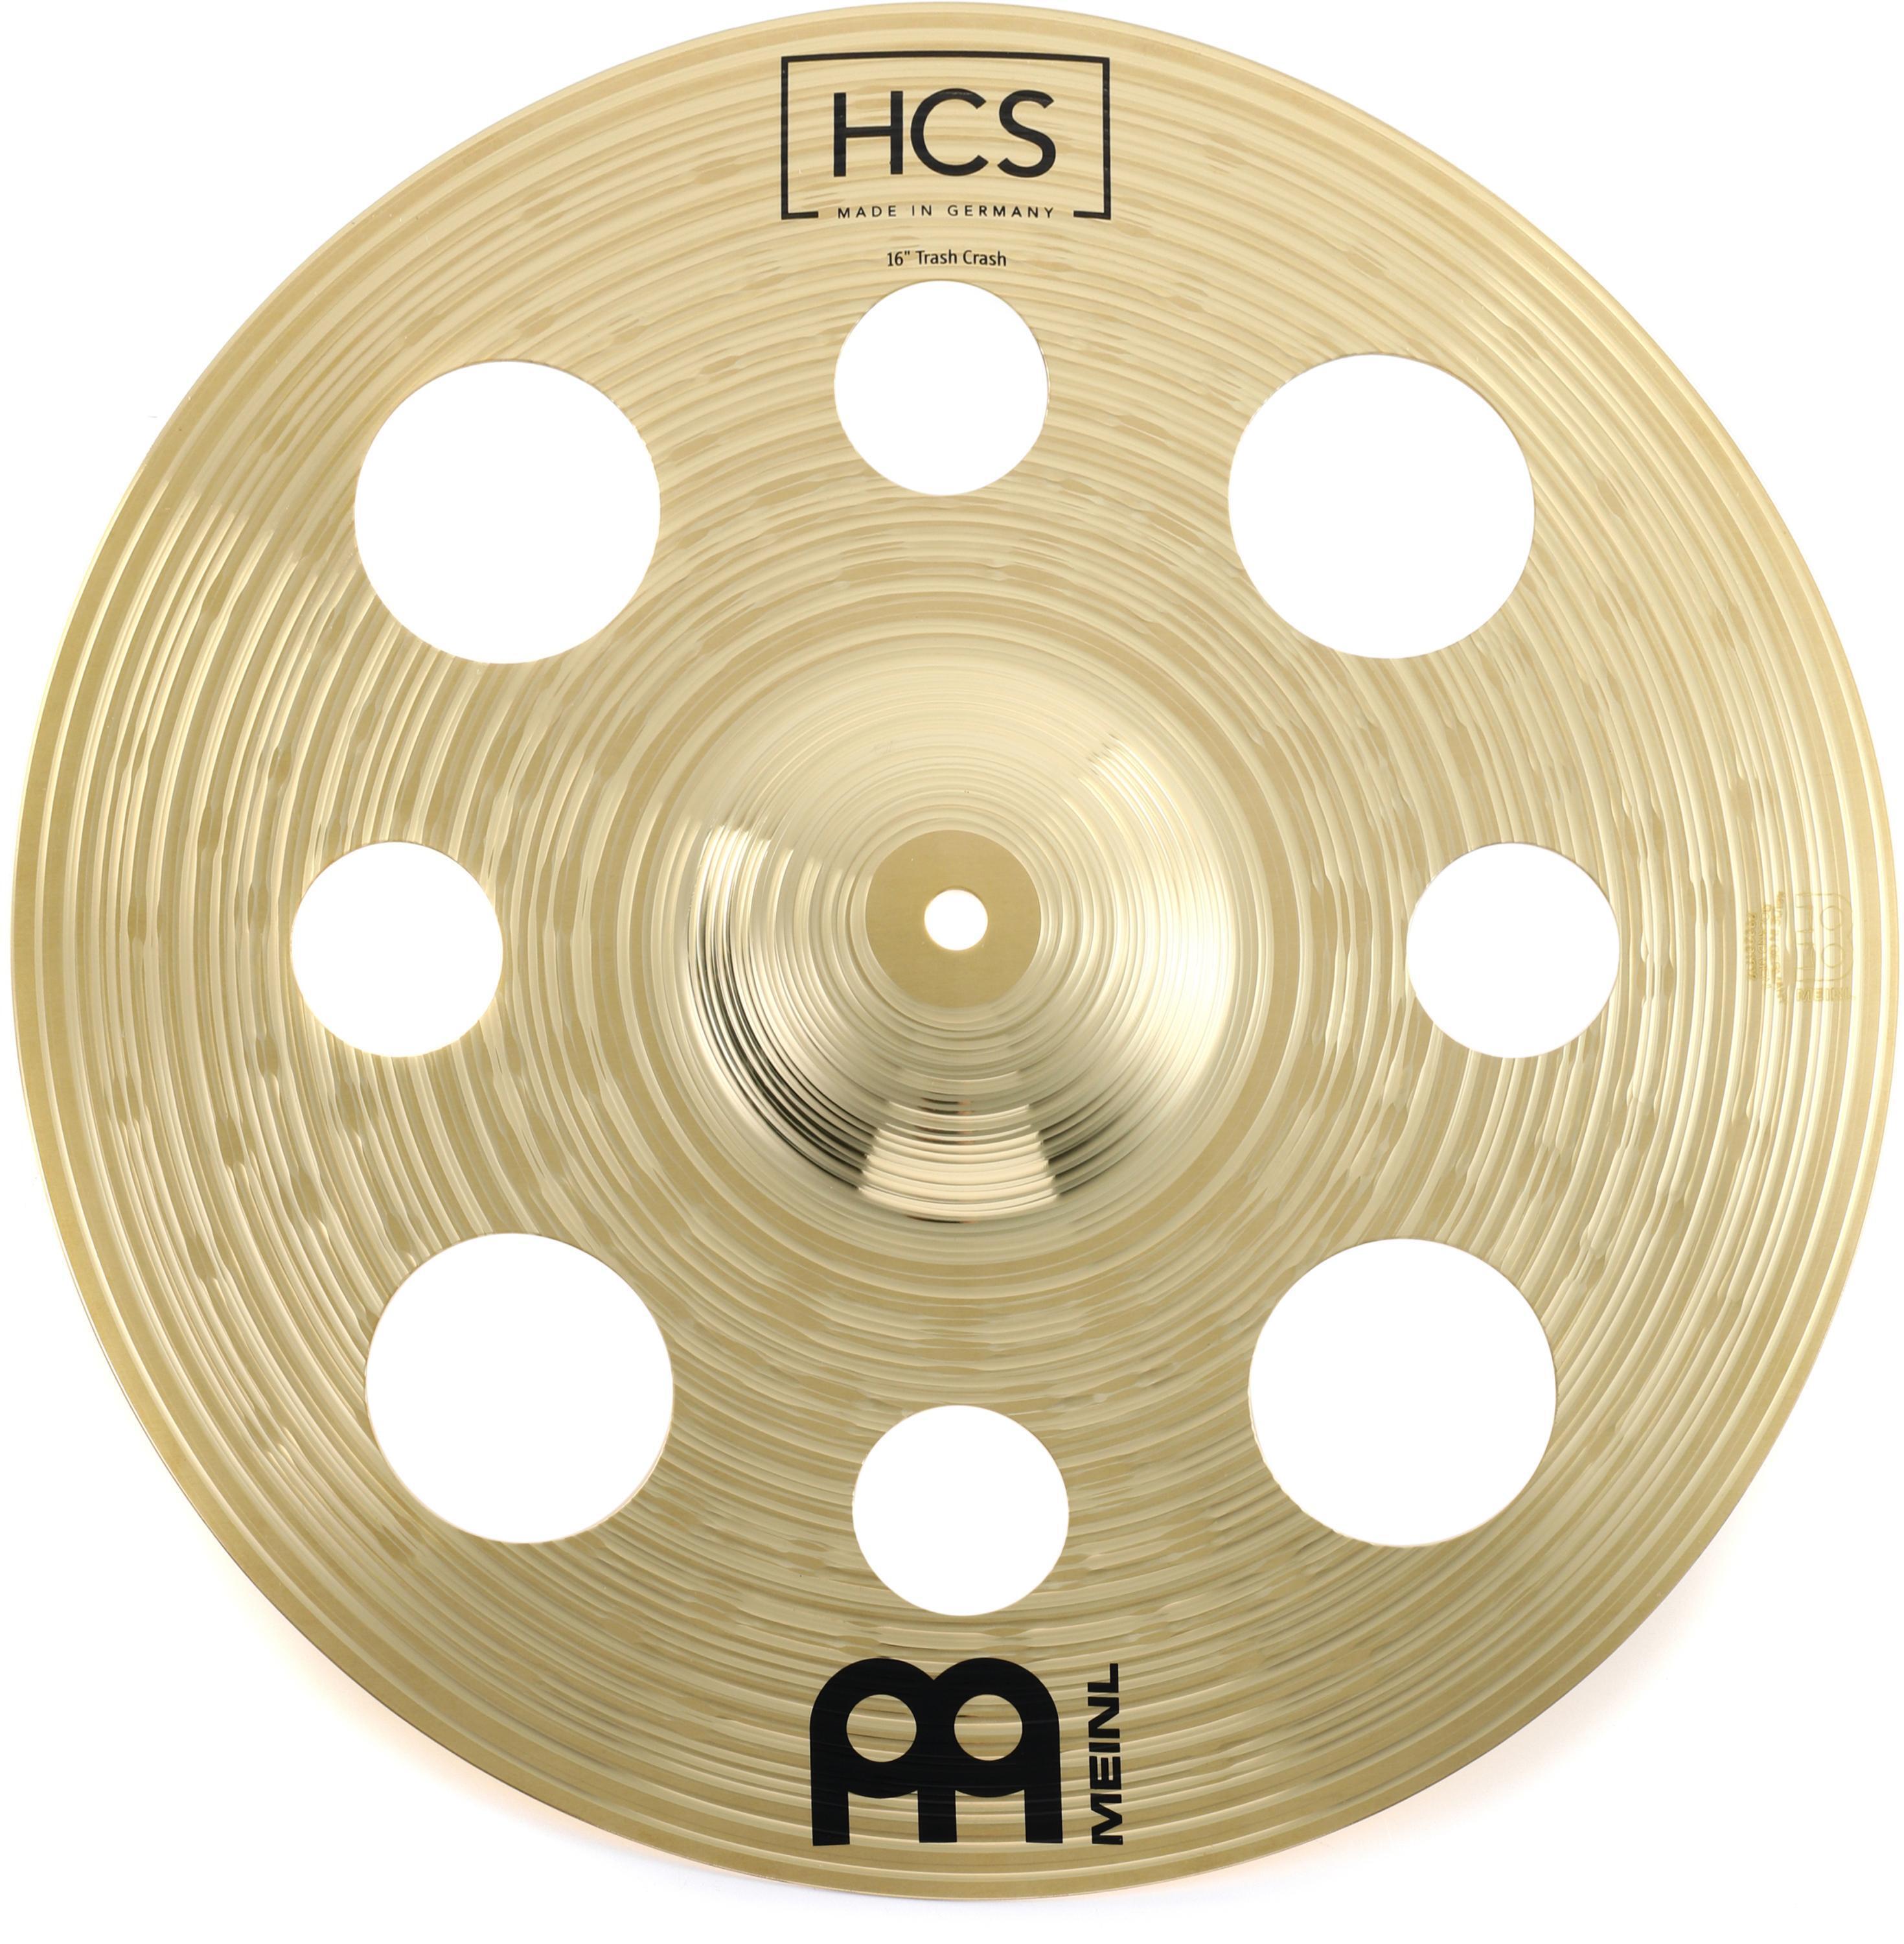 Meinl Cymbals 16-inch HCS Trash Crash Cymbal Reviews | Sweetwater